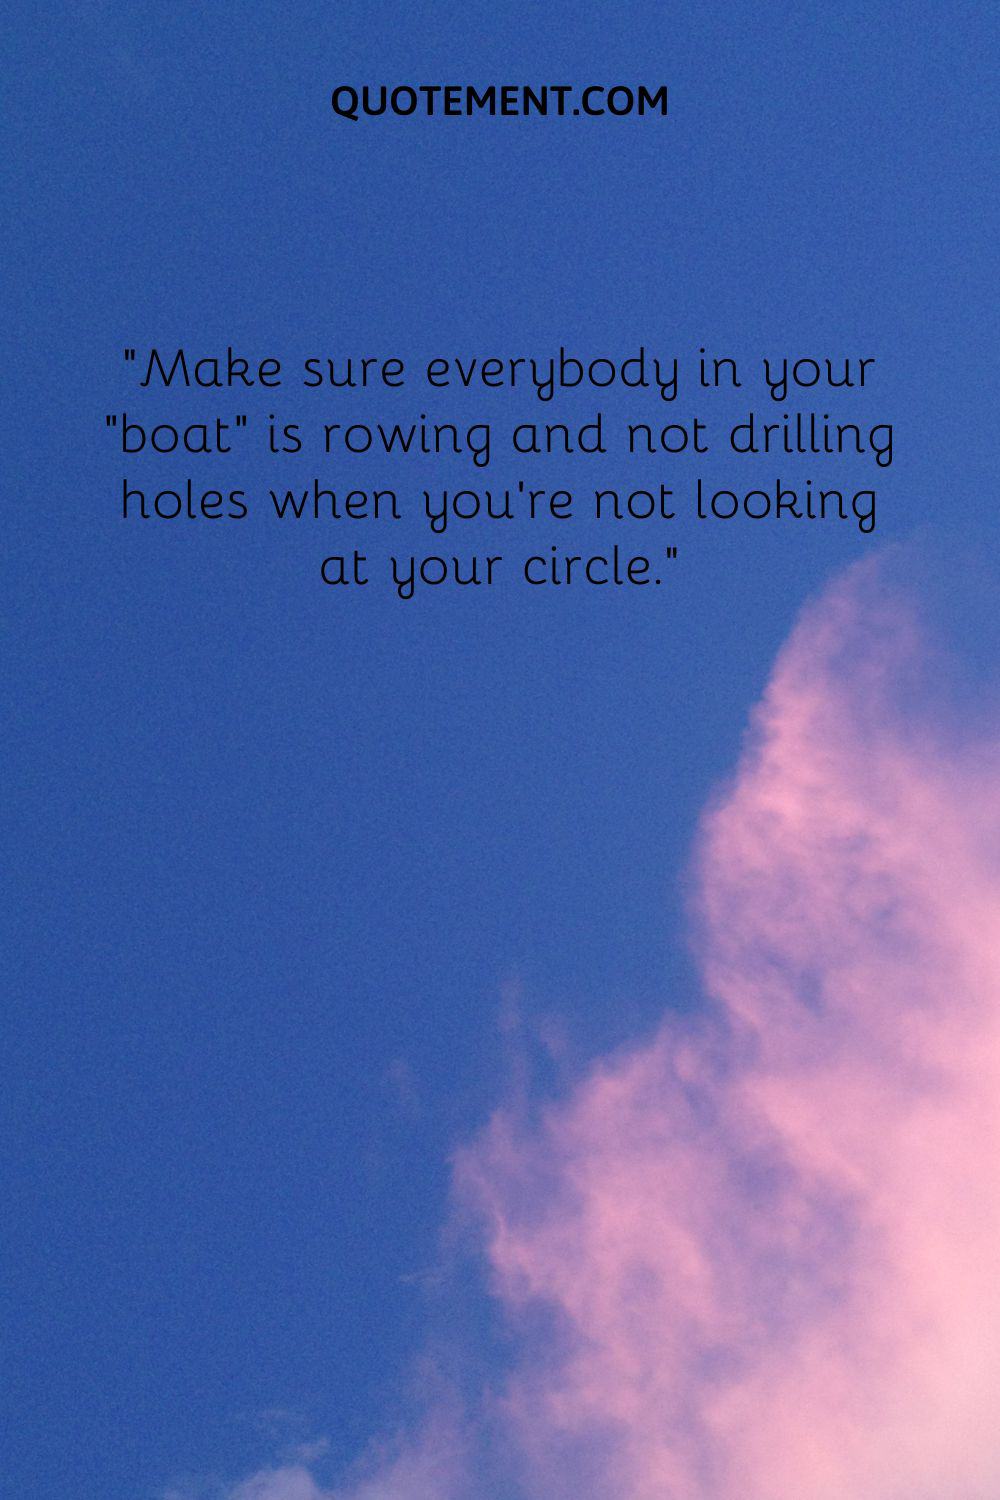 Make sure everybody in your “boat” is rowing and not drilling holes when you’re not looking at your circle